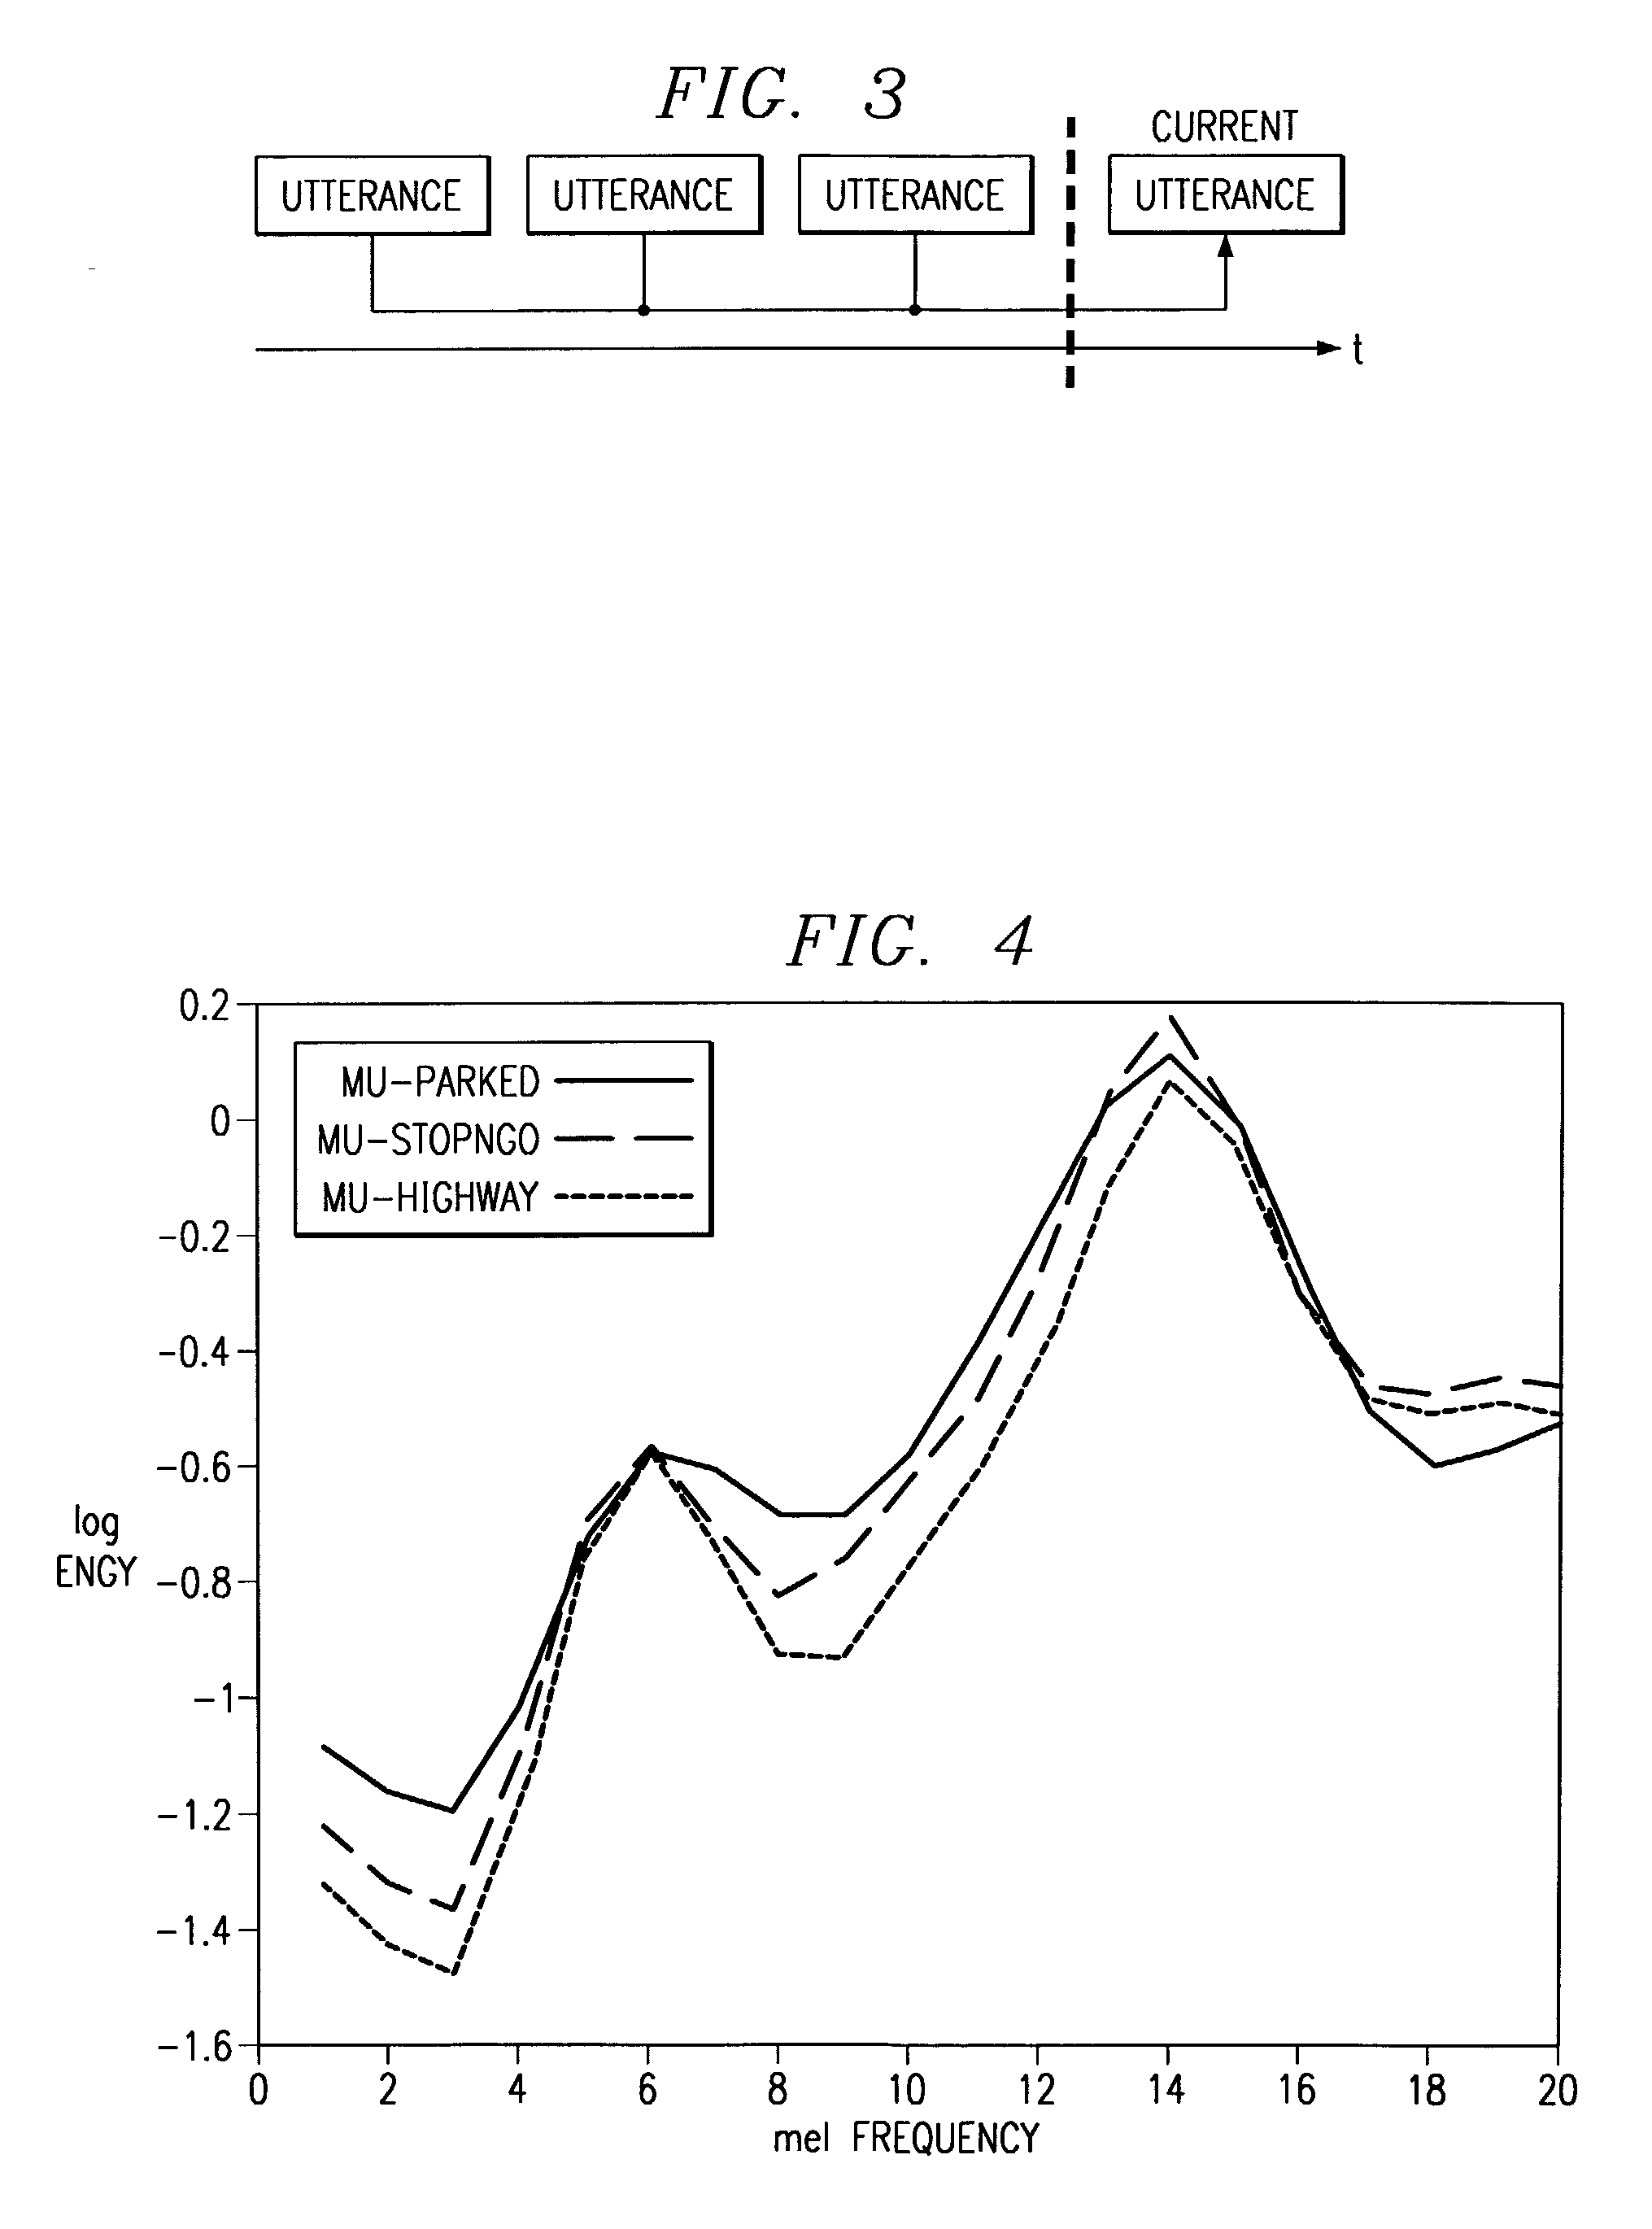 Method of speech recognition resistant to convolutive distortion and additive distortion